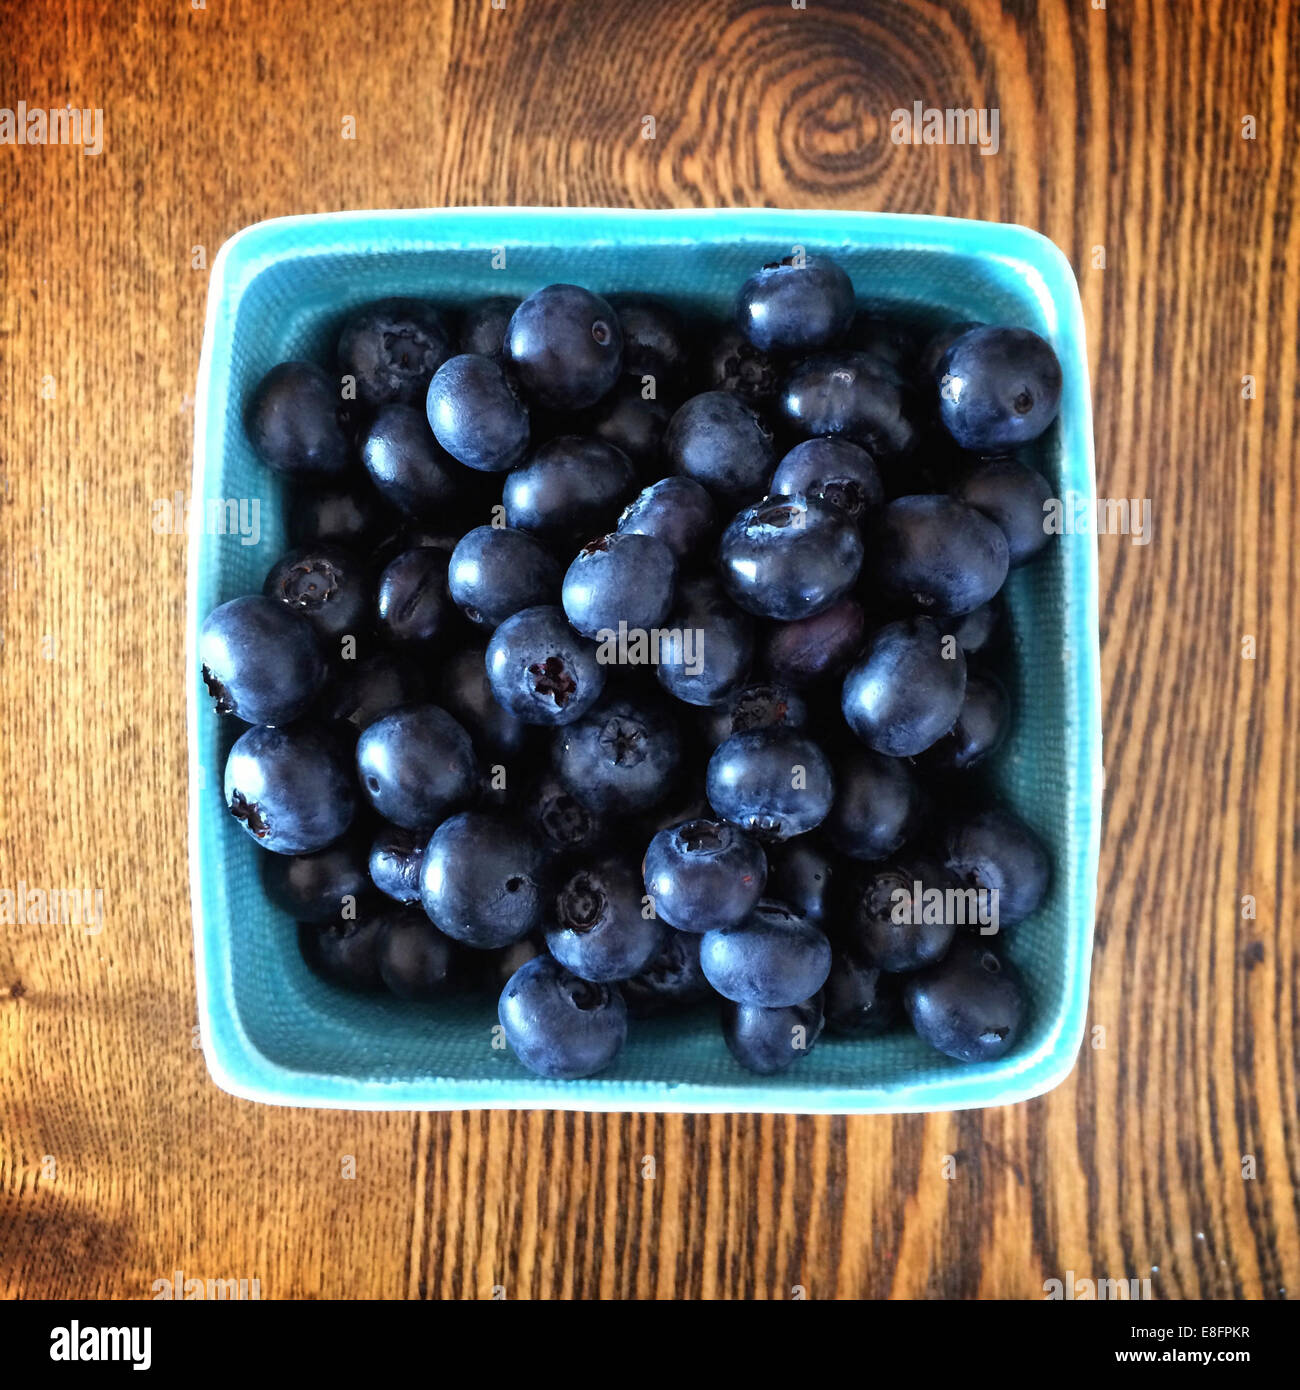 Overhead view of Box of blueberries Stock Photo